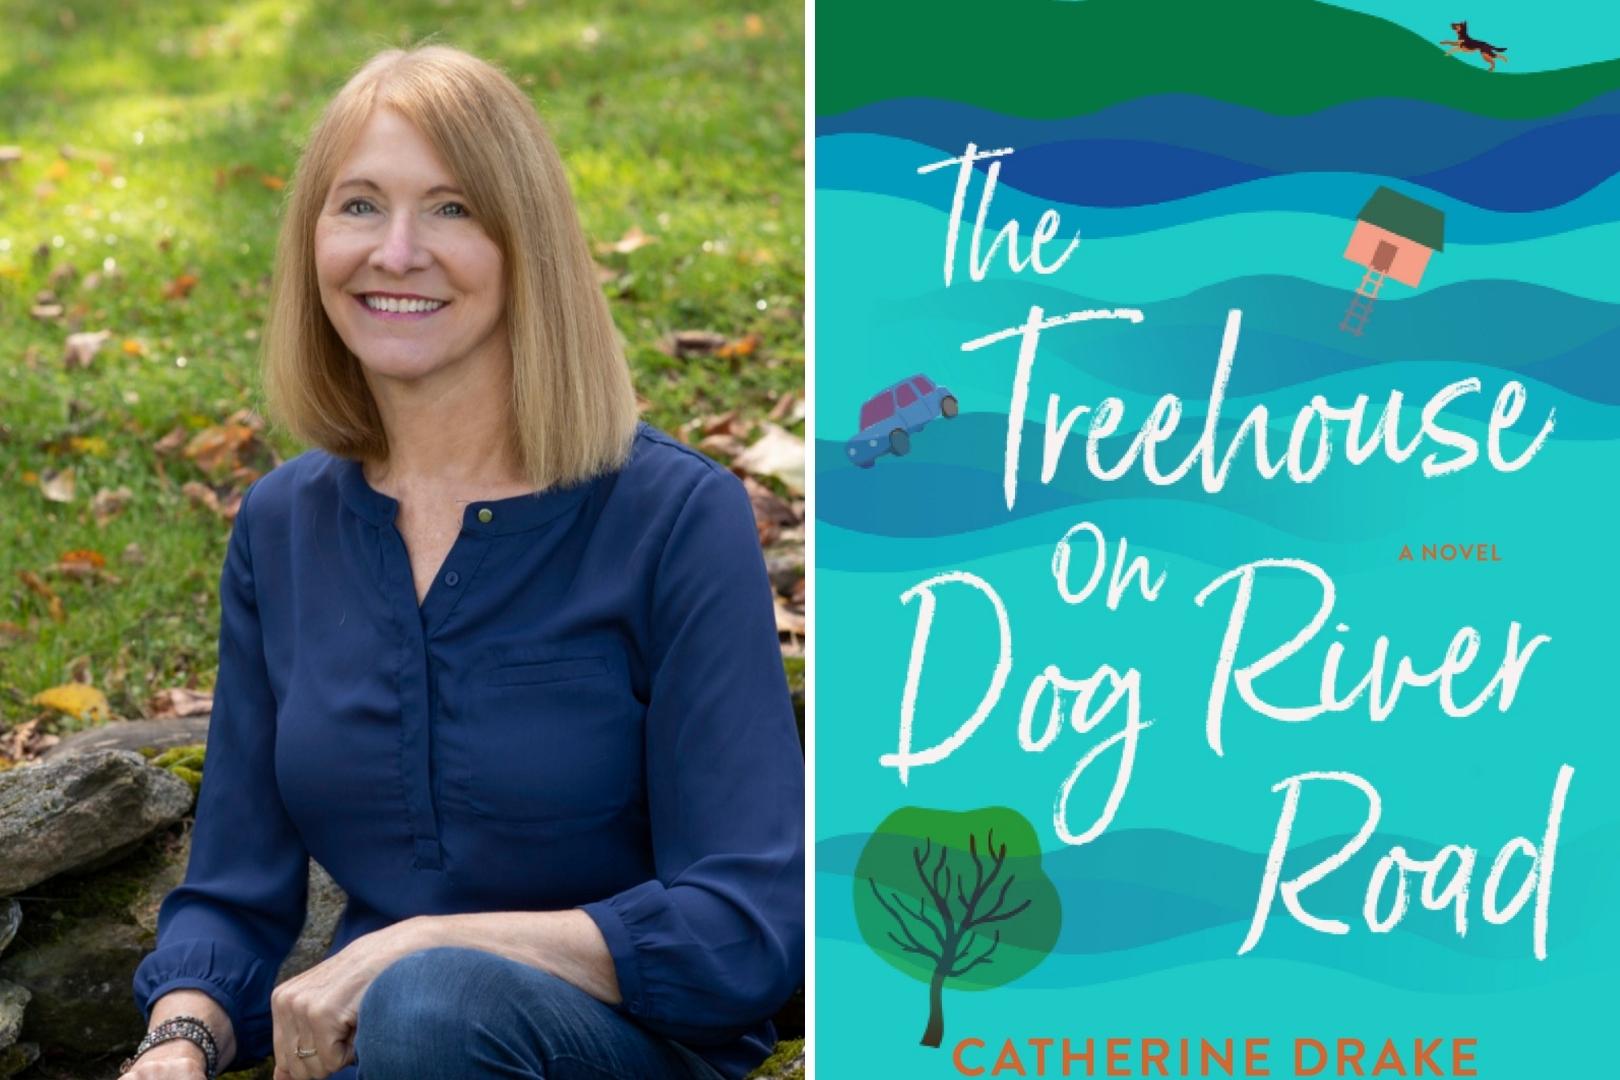 Q&A with Catherine Drake, Author of The Treehouse on Dog River